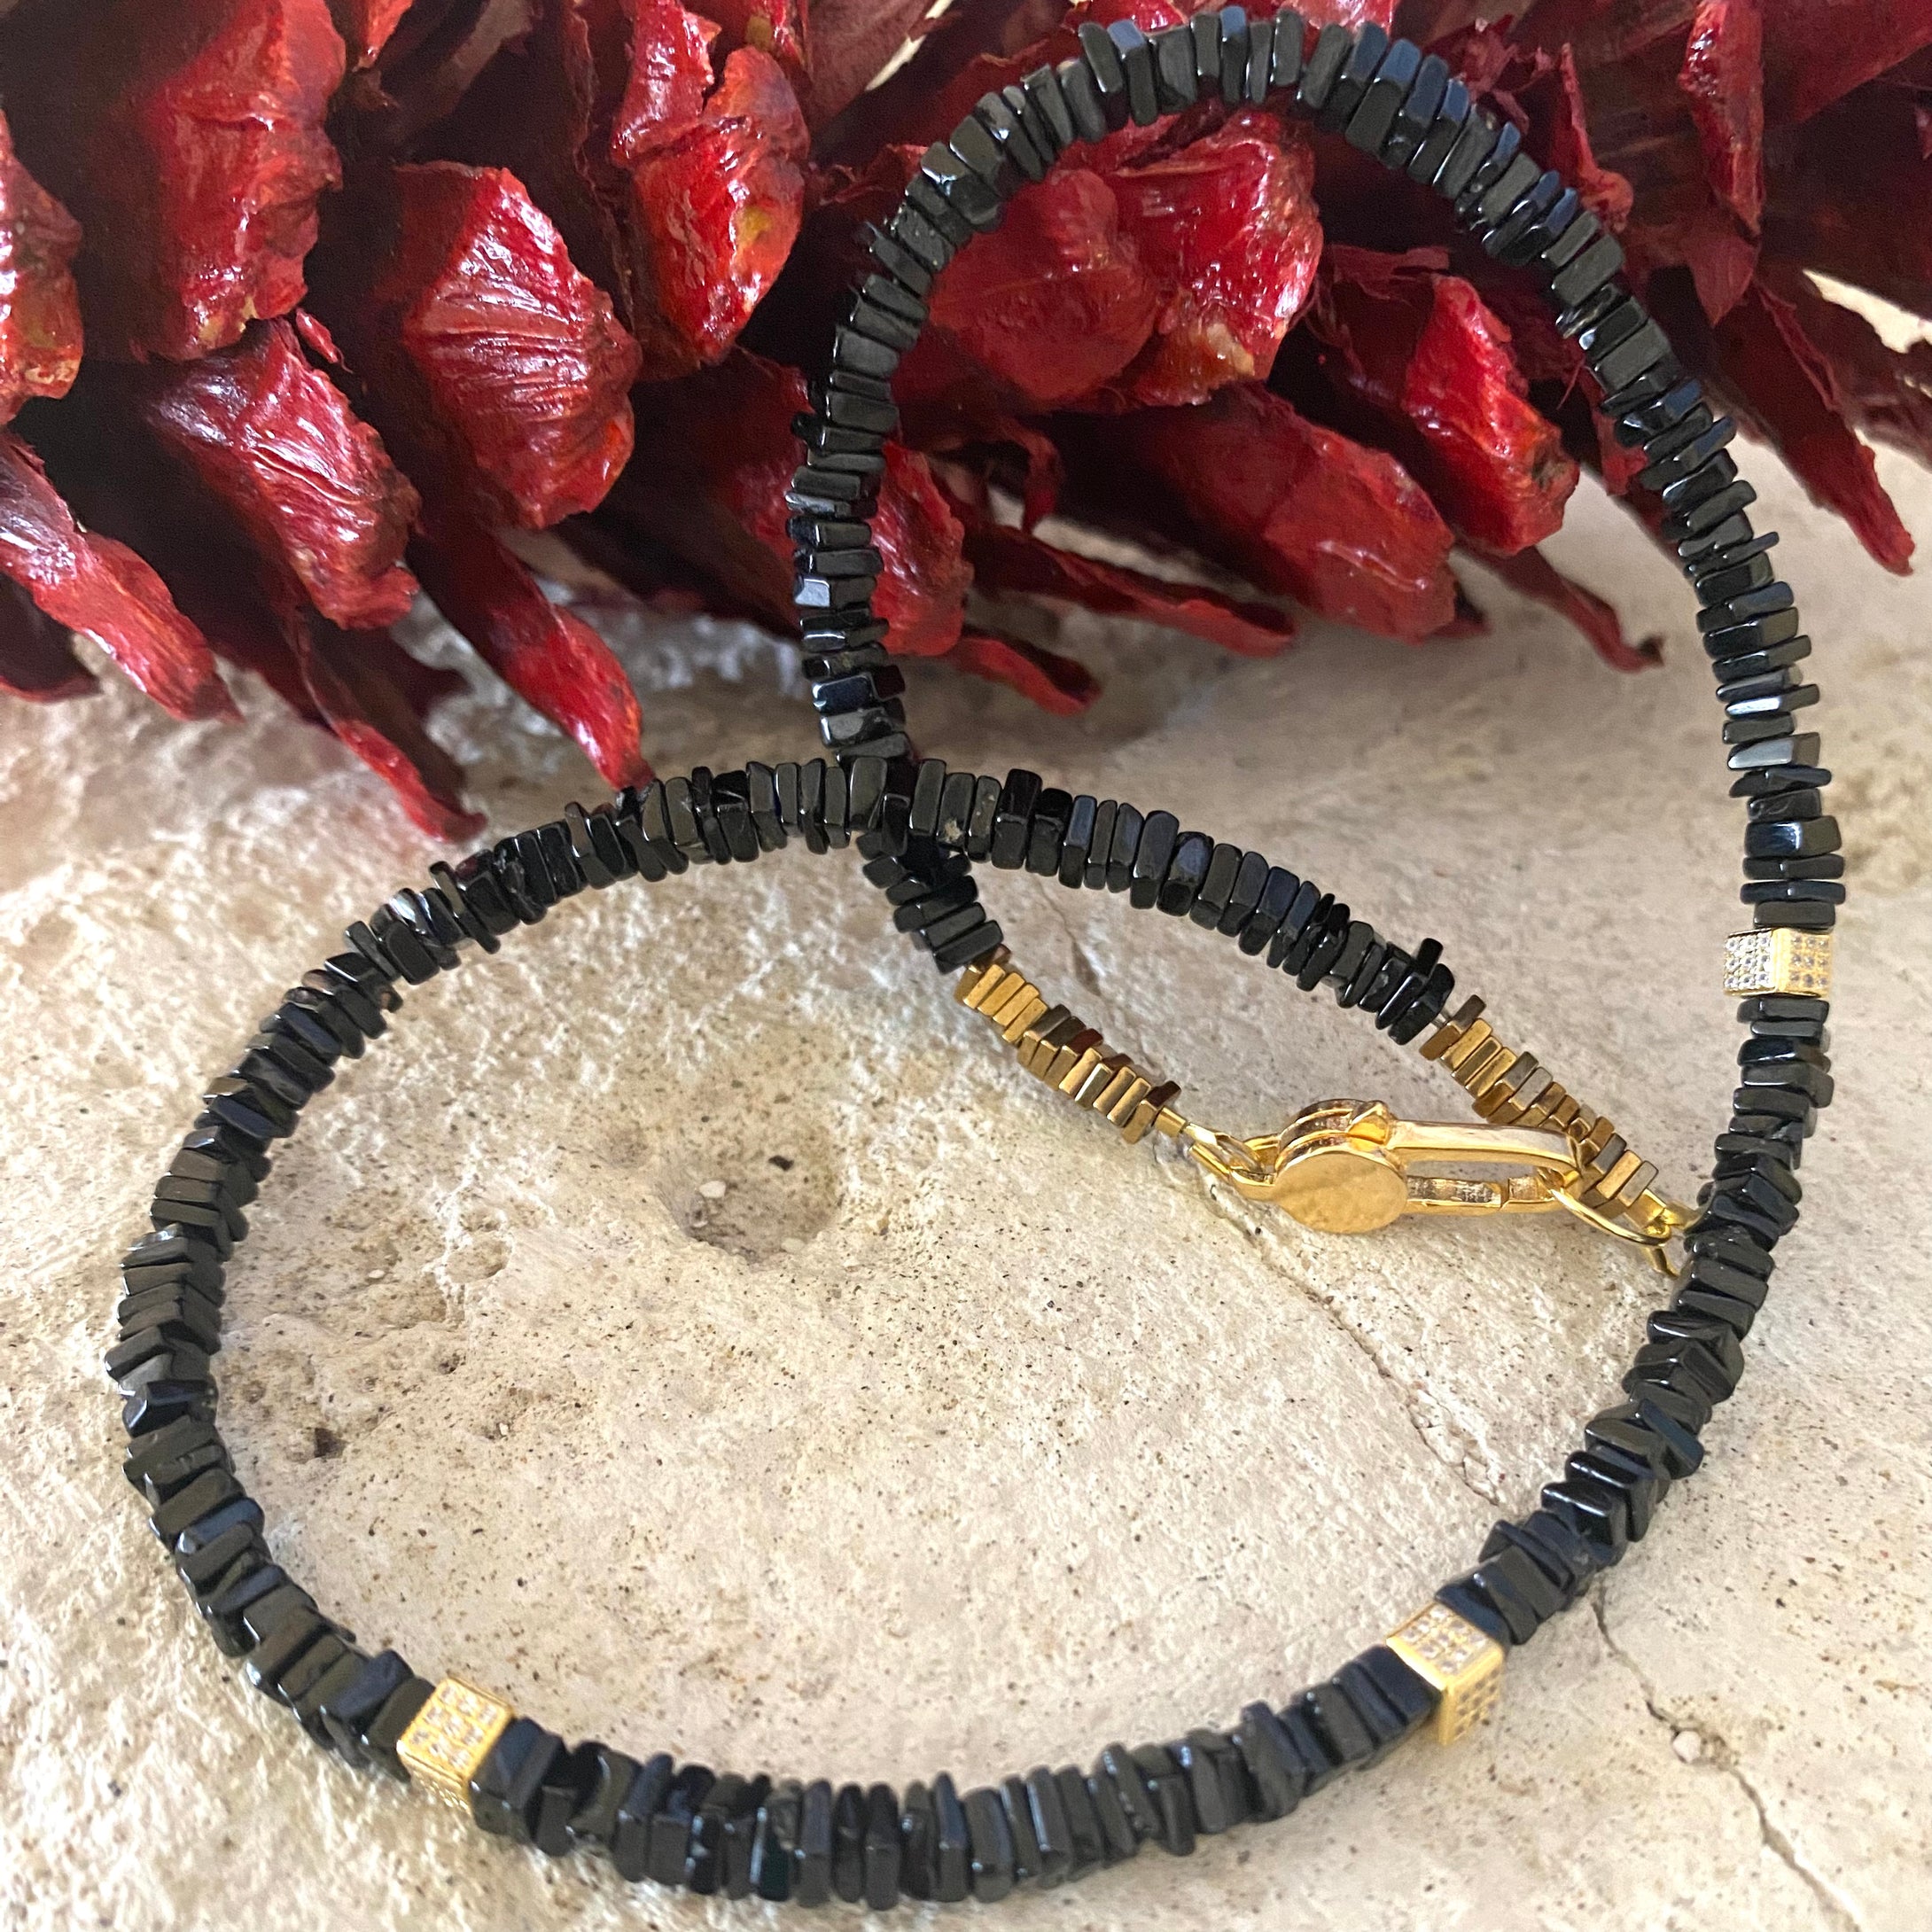 Black Spinel Beads Choker Necklace with Gold Vermeil Details and Clasp, 15